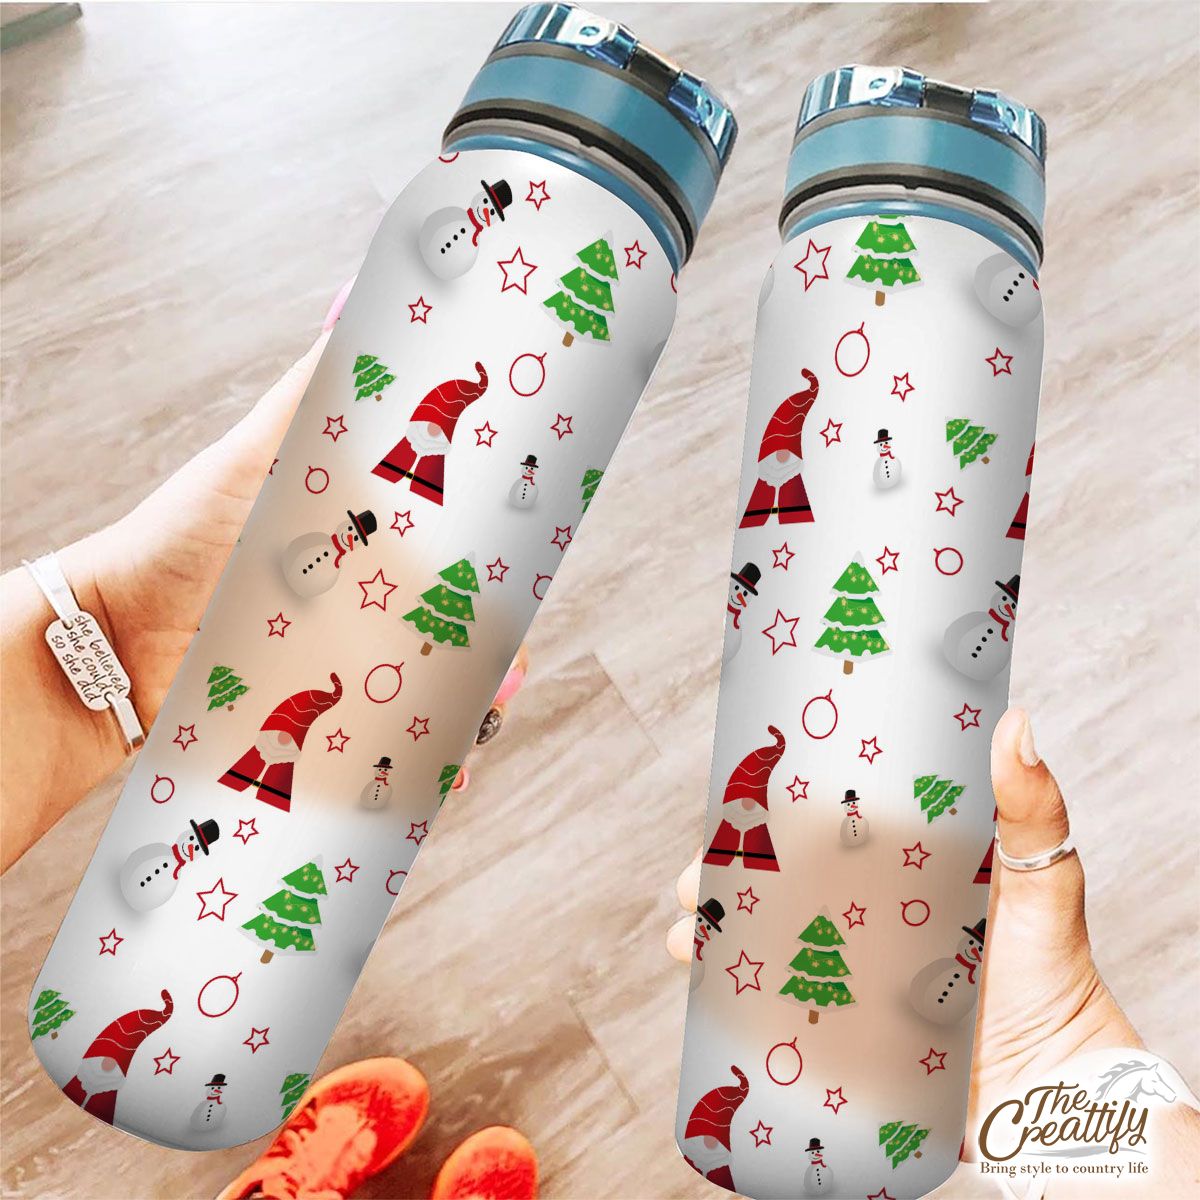 Santa Claus, Snowman Clipart And Pine Tree Silhouette Seamless Pattern Tracker Bottle